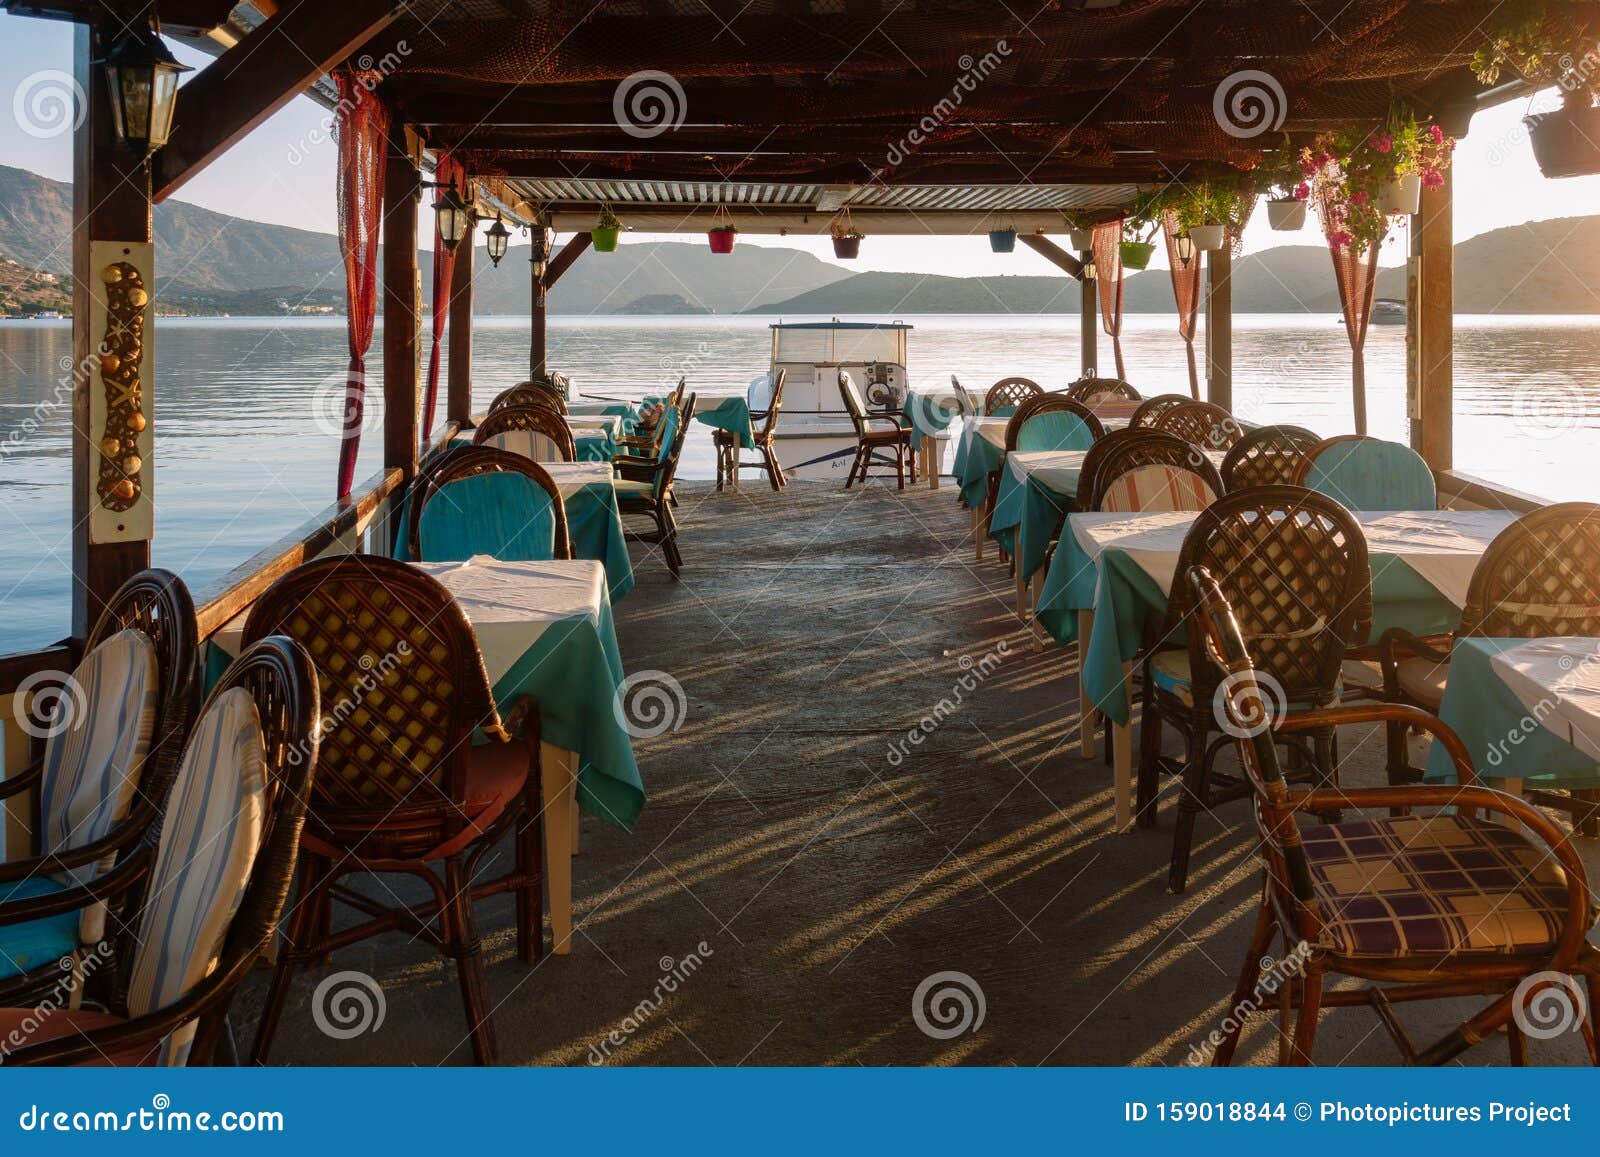 Traditional Tavern on the Water in Elounda Stock Photo - Image of